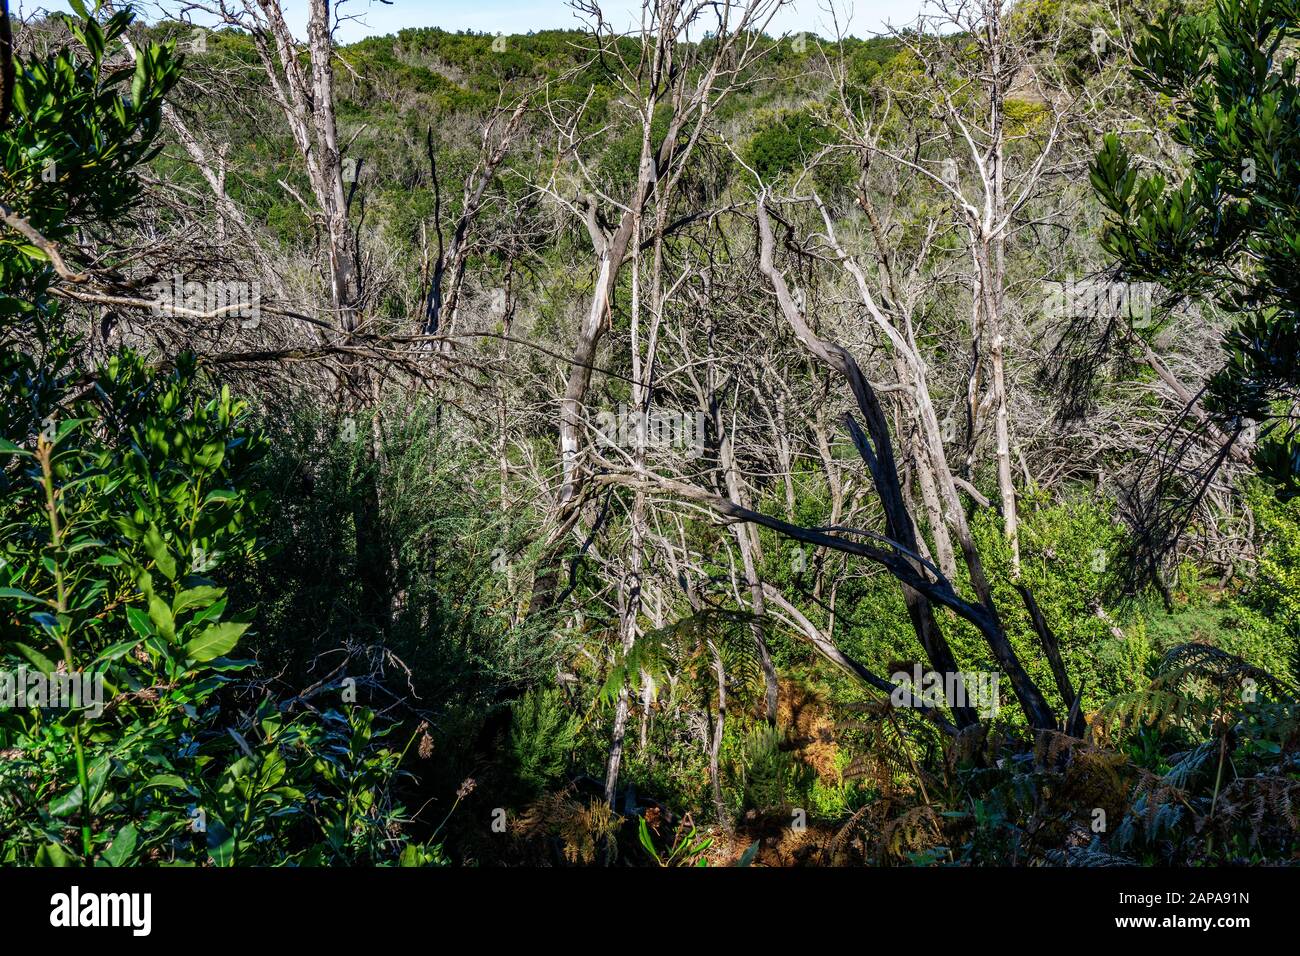 Fire damage from the Fire of the Year 2012 in the Garajonay National Park on the Canary Island of La Gomera Stock Photo